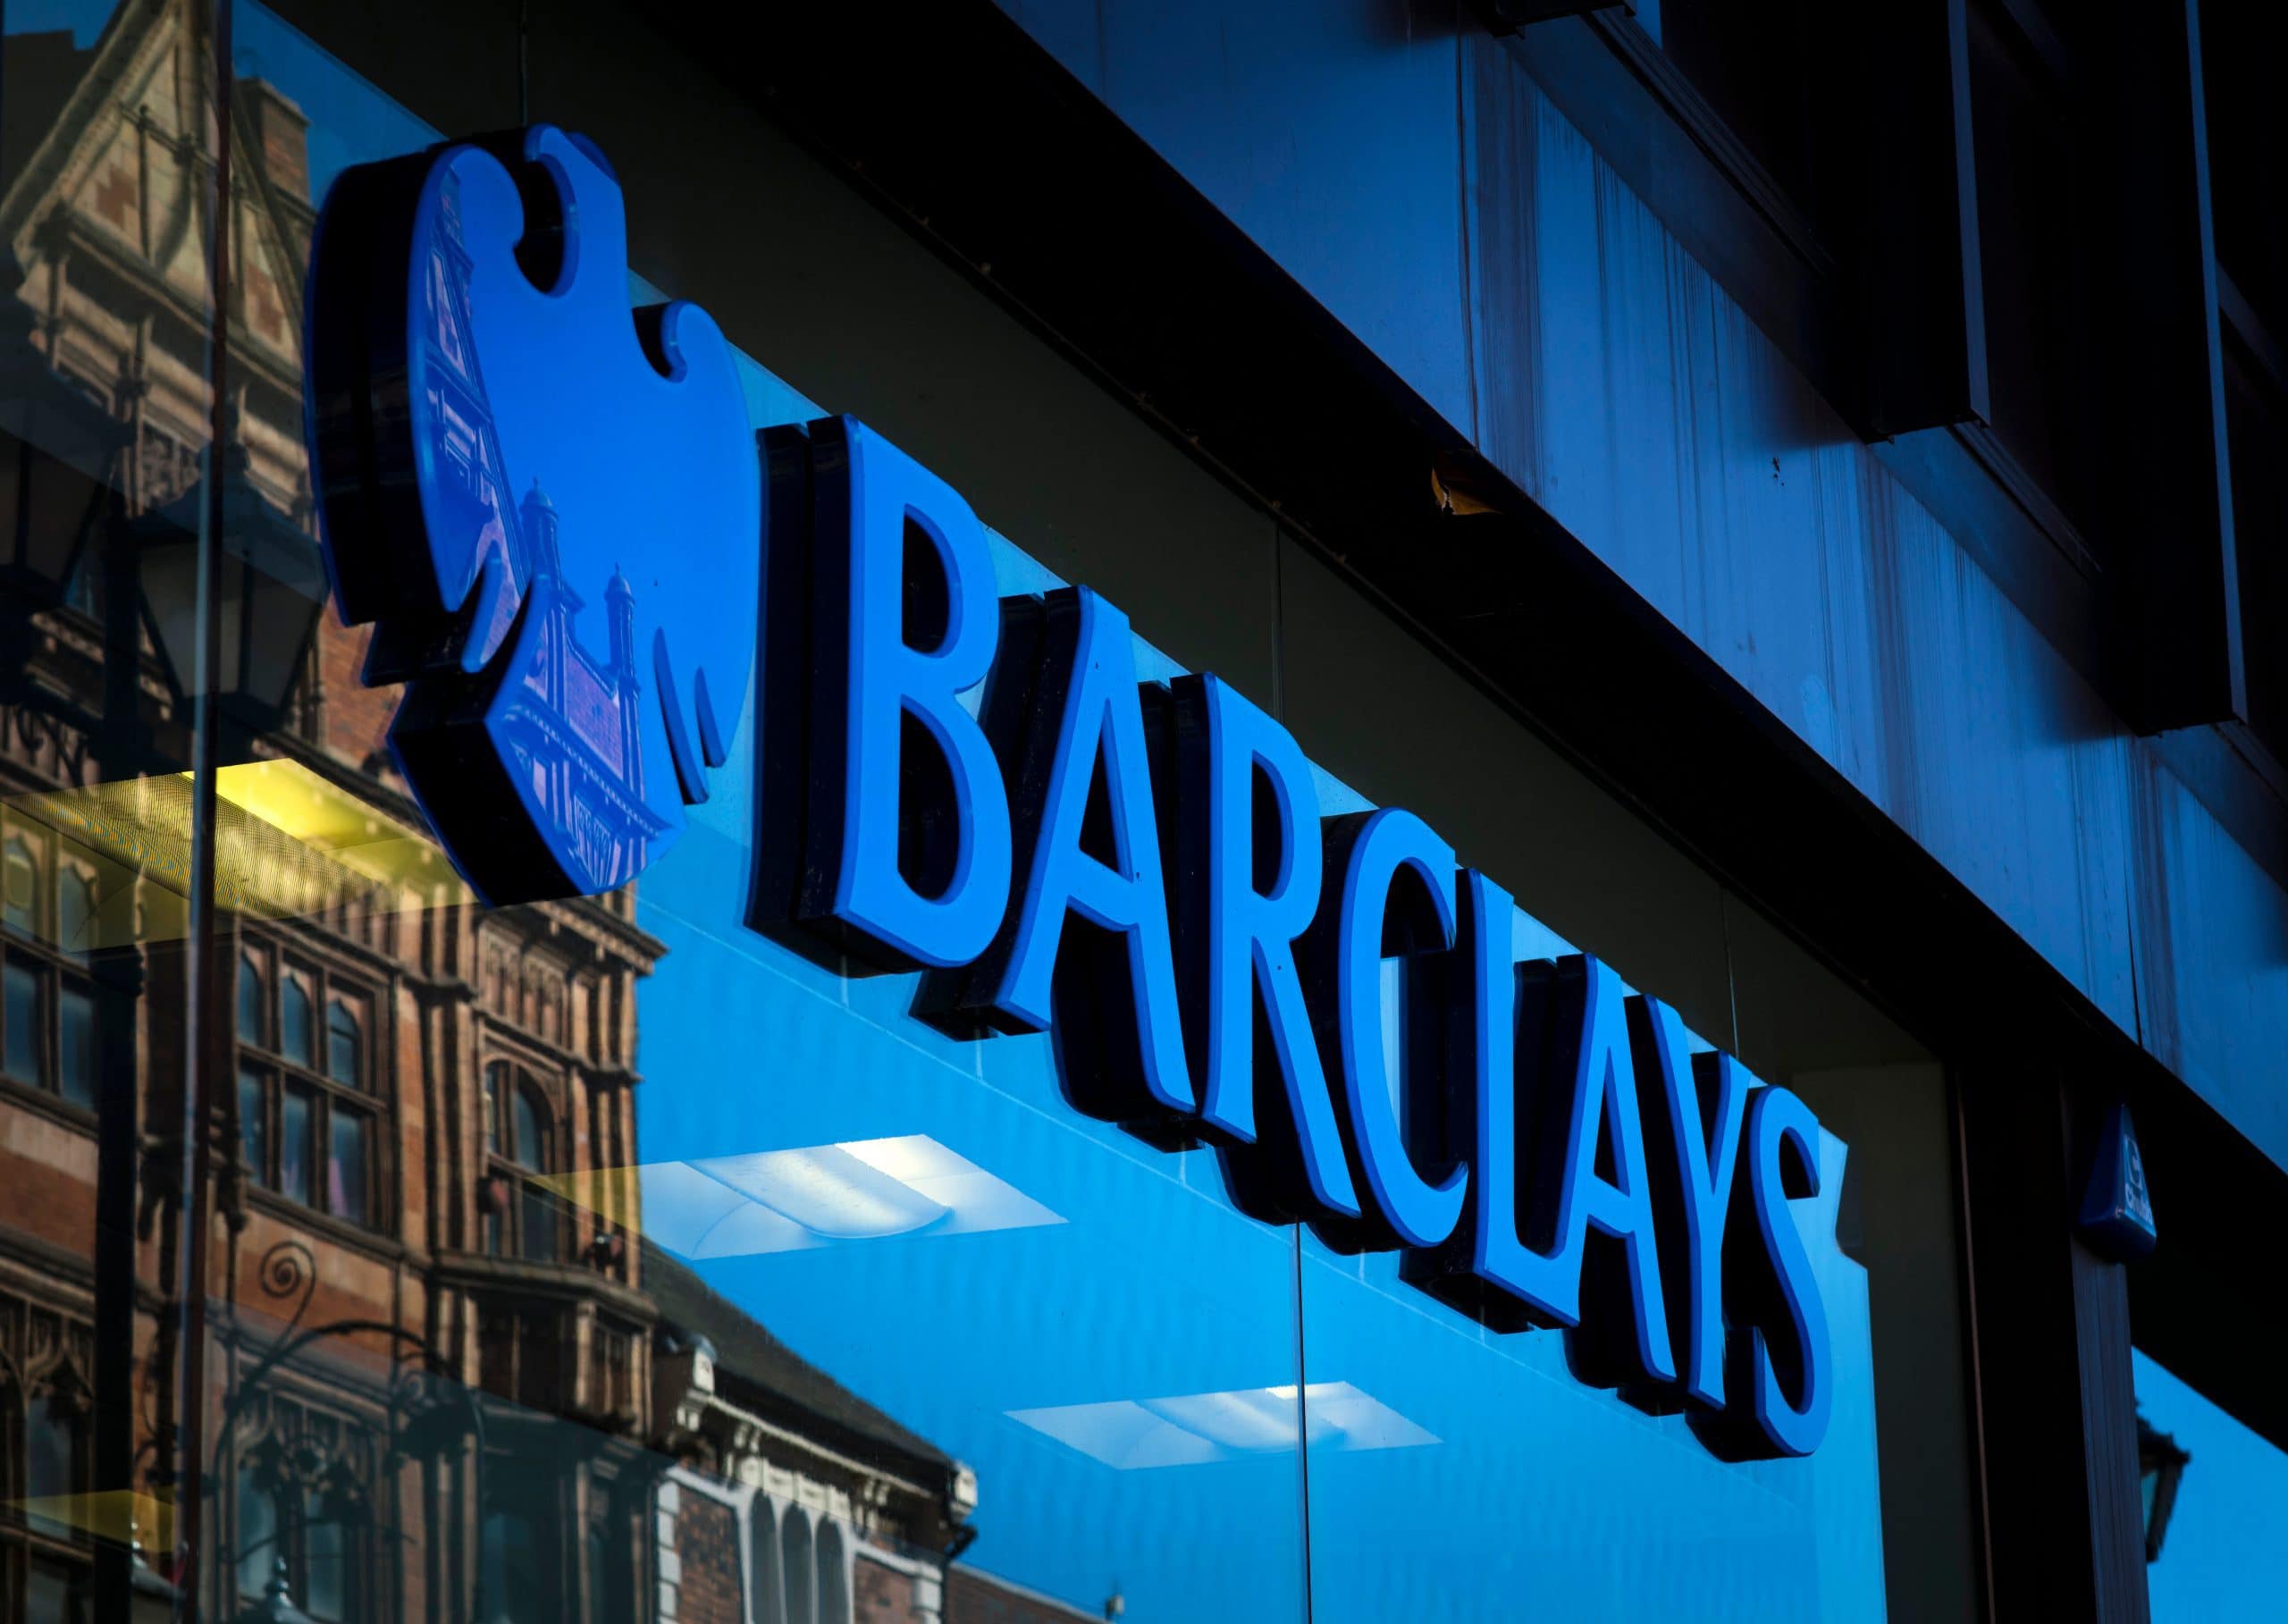 British bank Barclays suspends payments